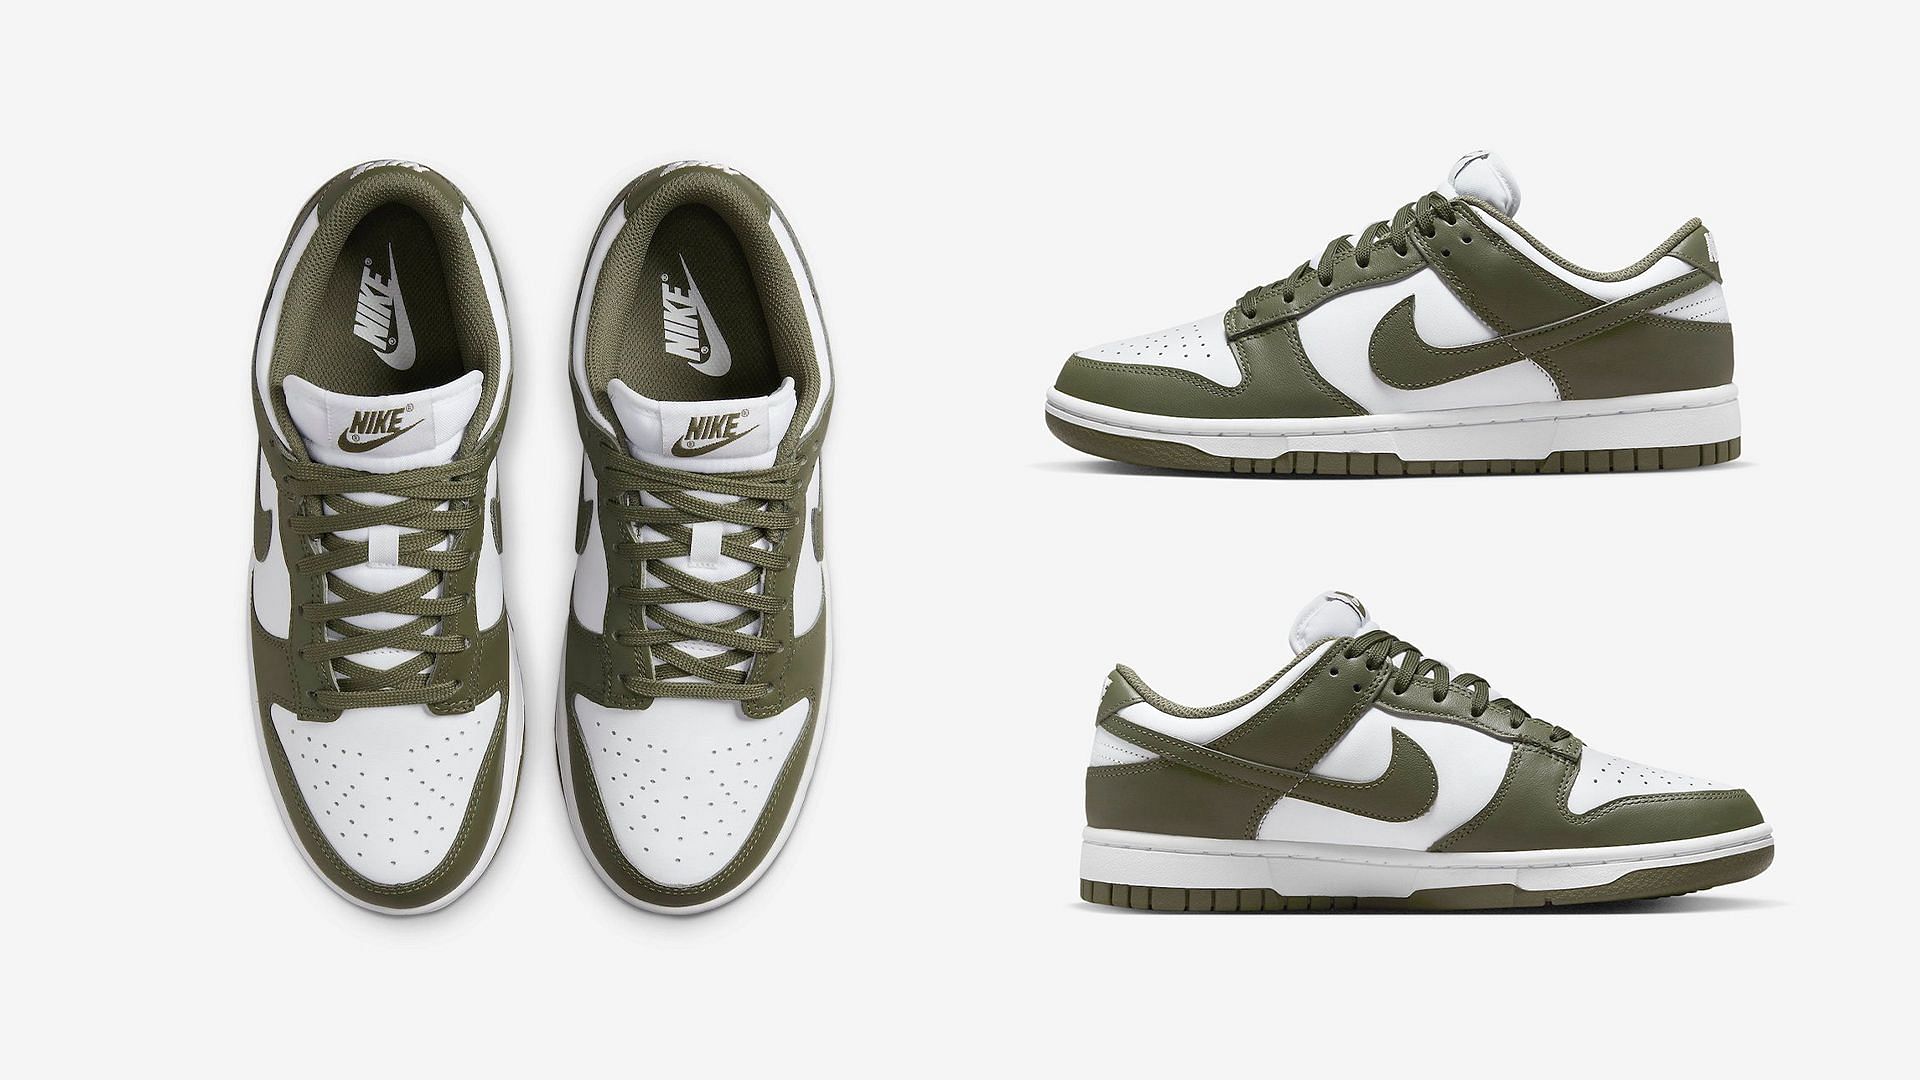 Medium Olive: What time will Nike Dunk Low 